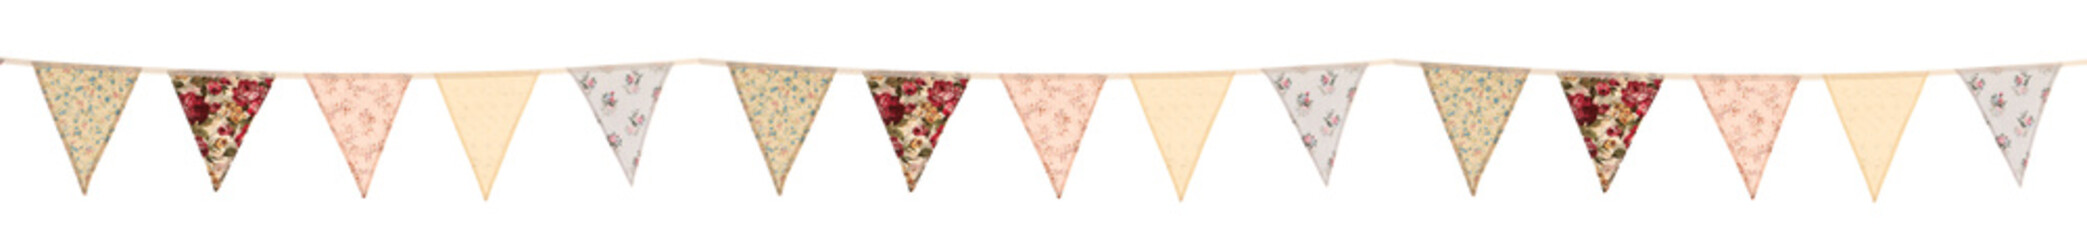 Vintage style shabby chic floral wedding bunting isolated on a white background